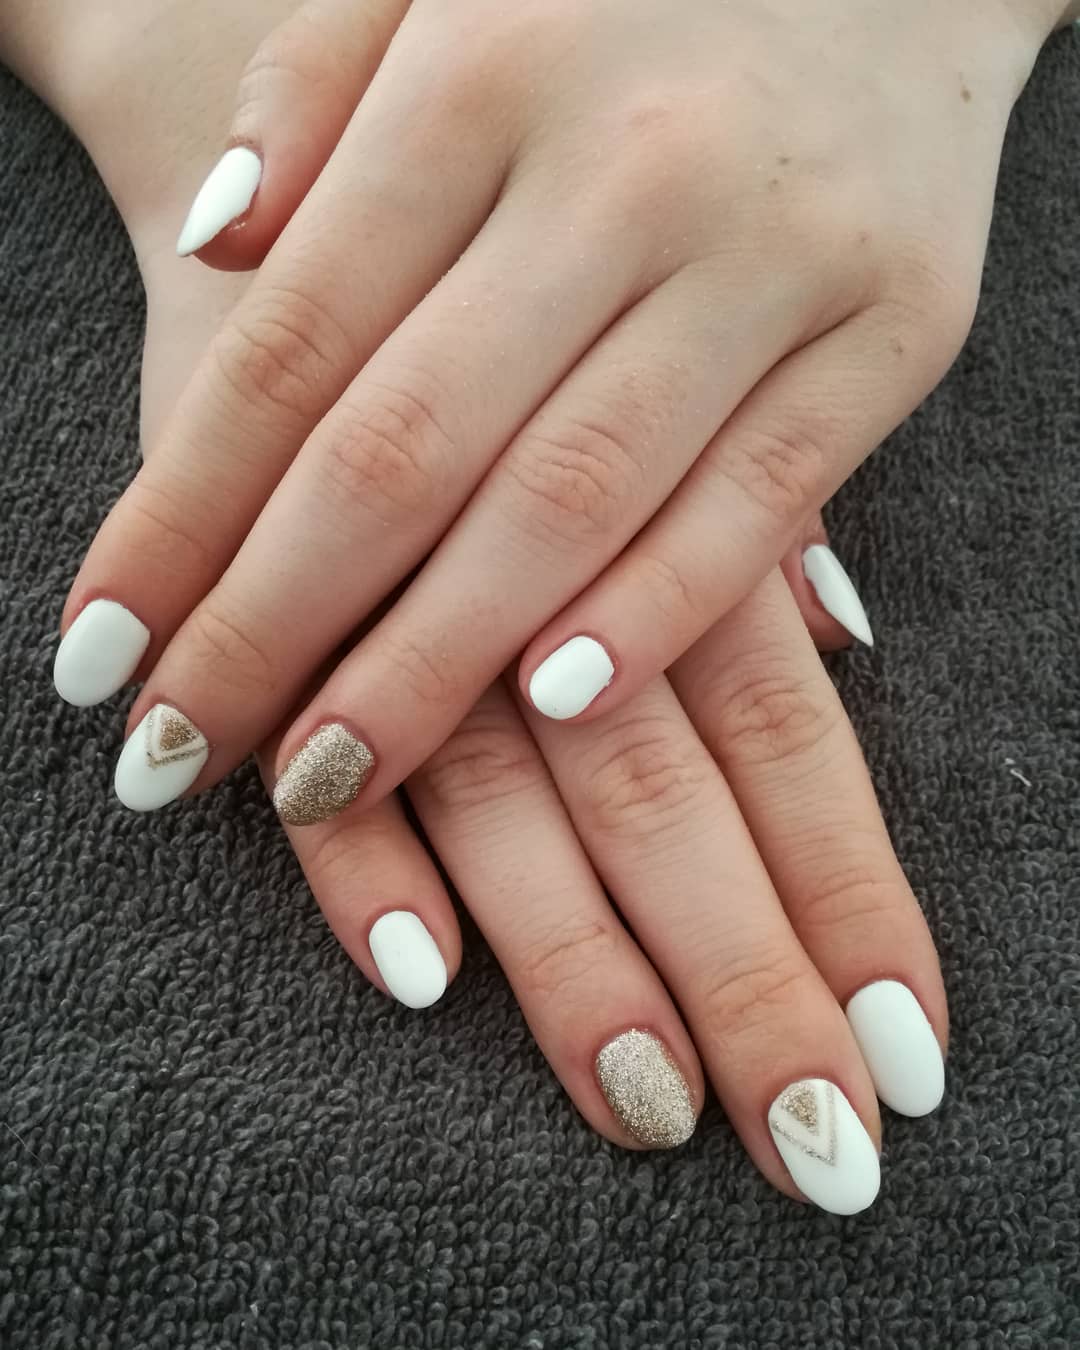 Fashionable White Nails with Golden Nail Art